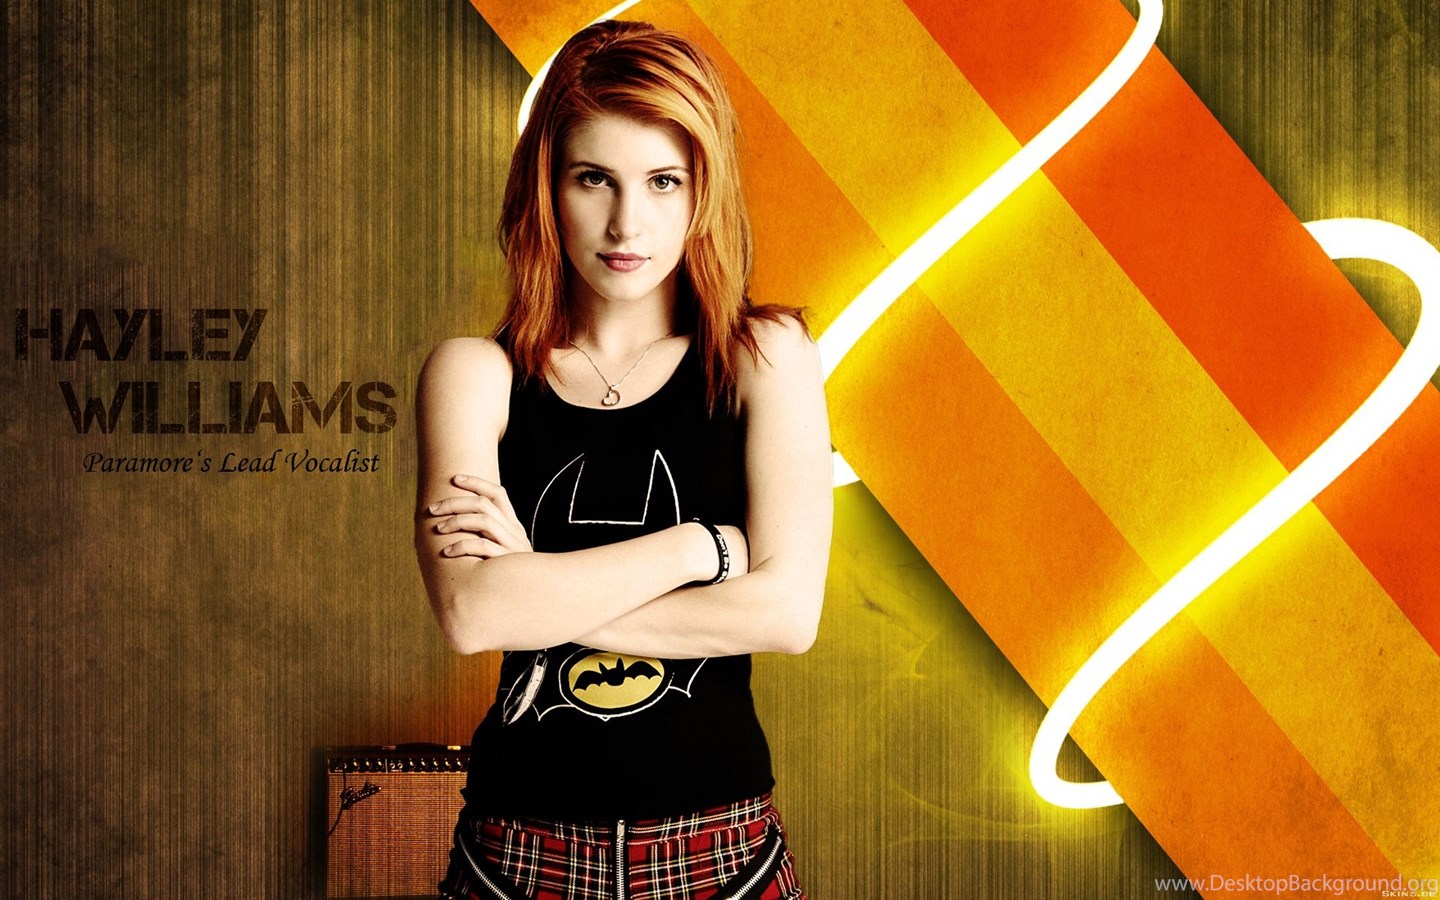 Amazing Hayley Williams Wallpapers Desktop Background Images, Photos, Reviews